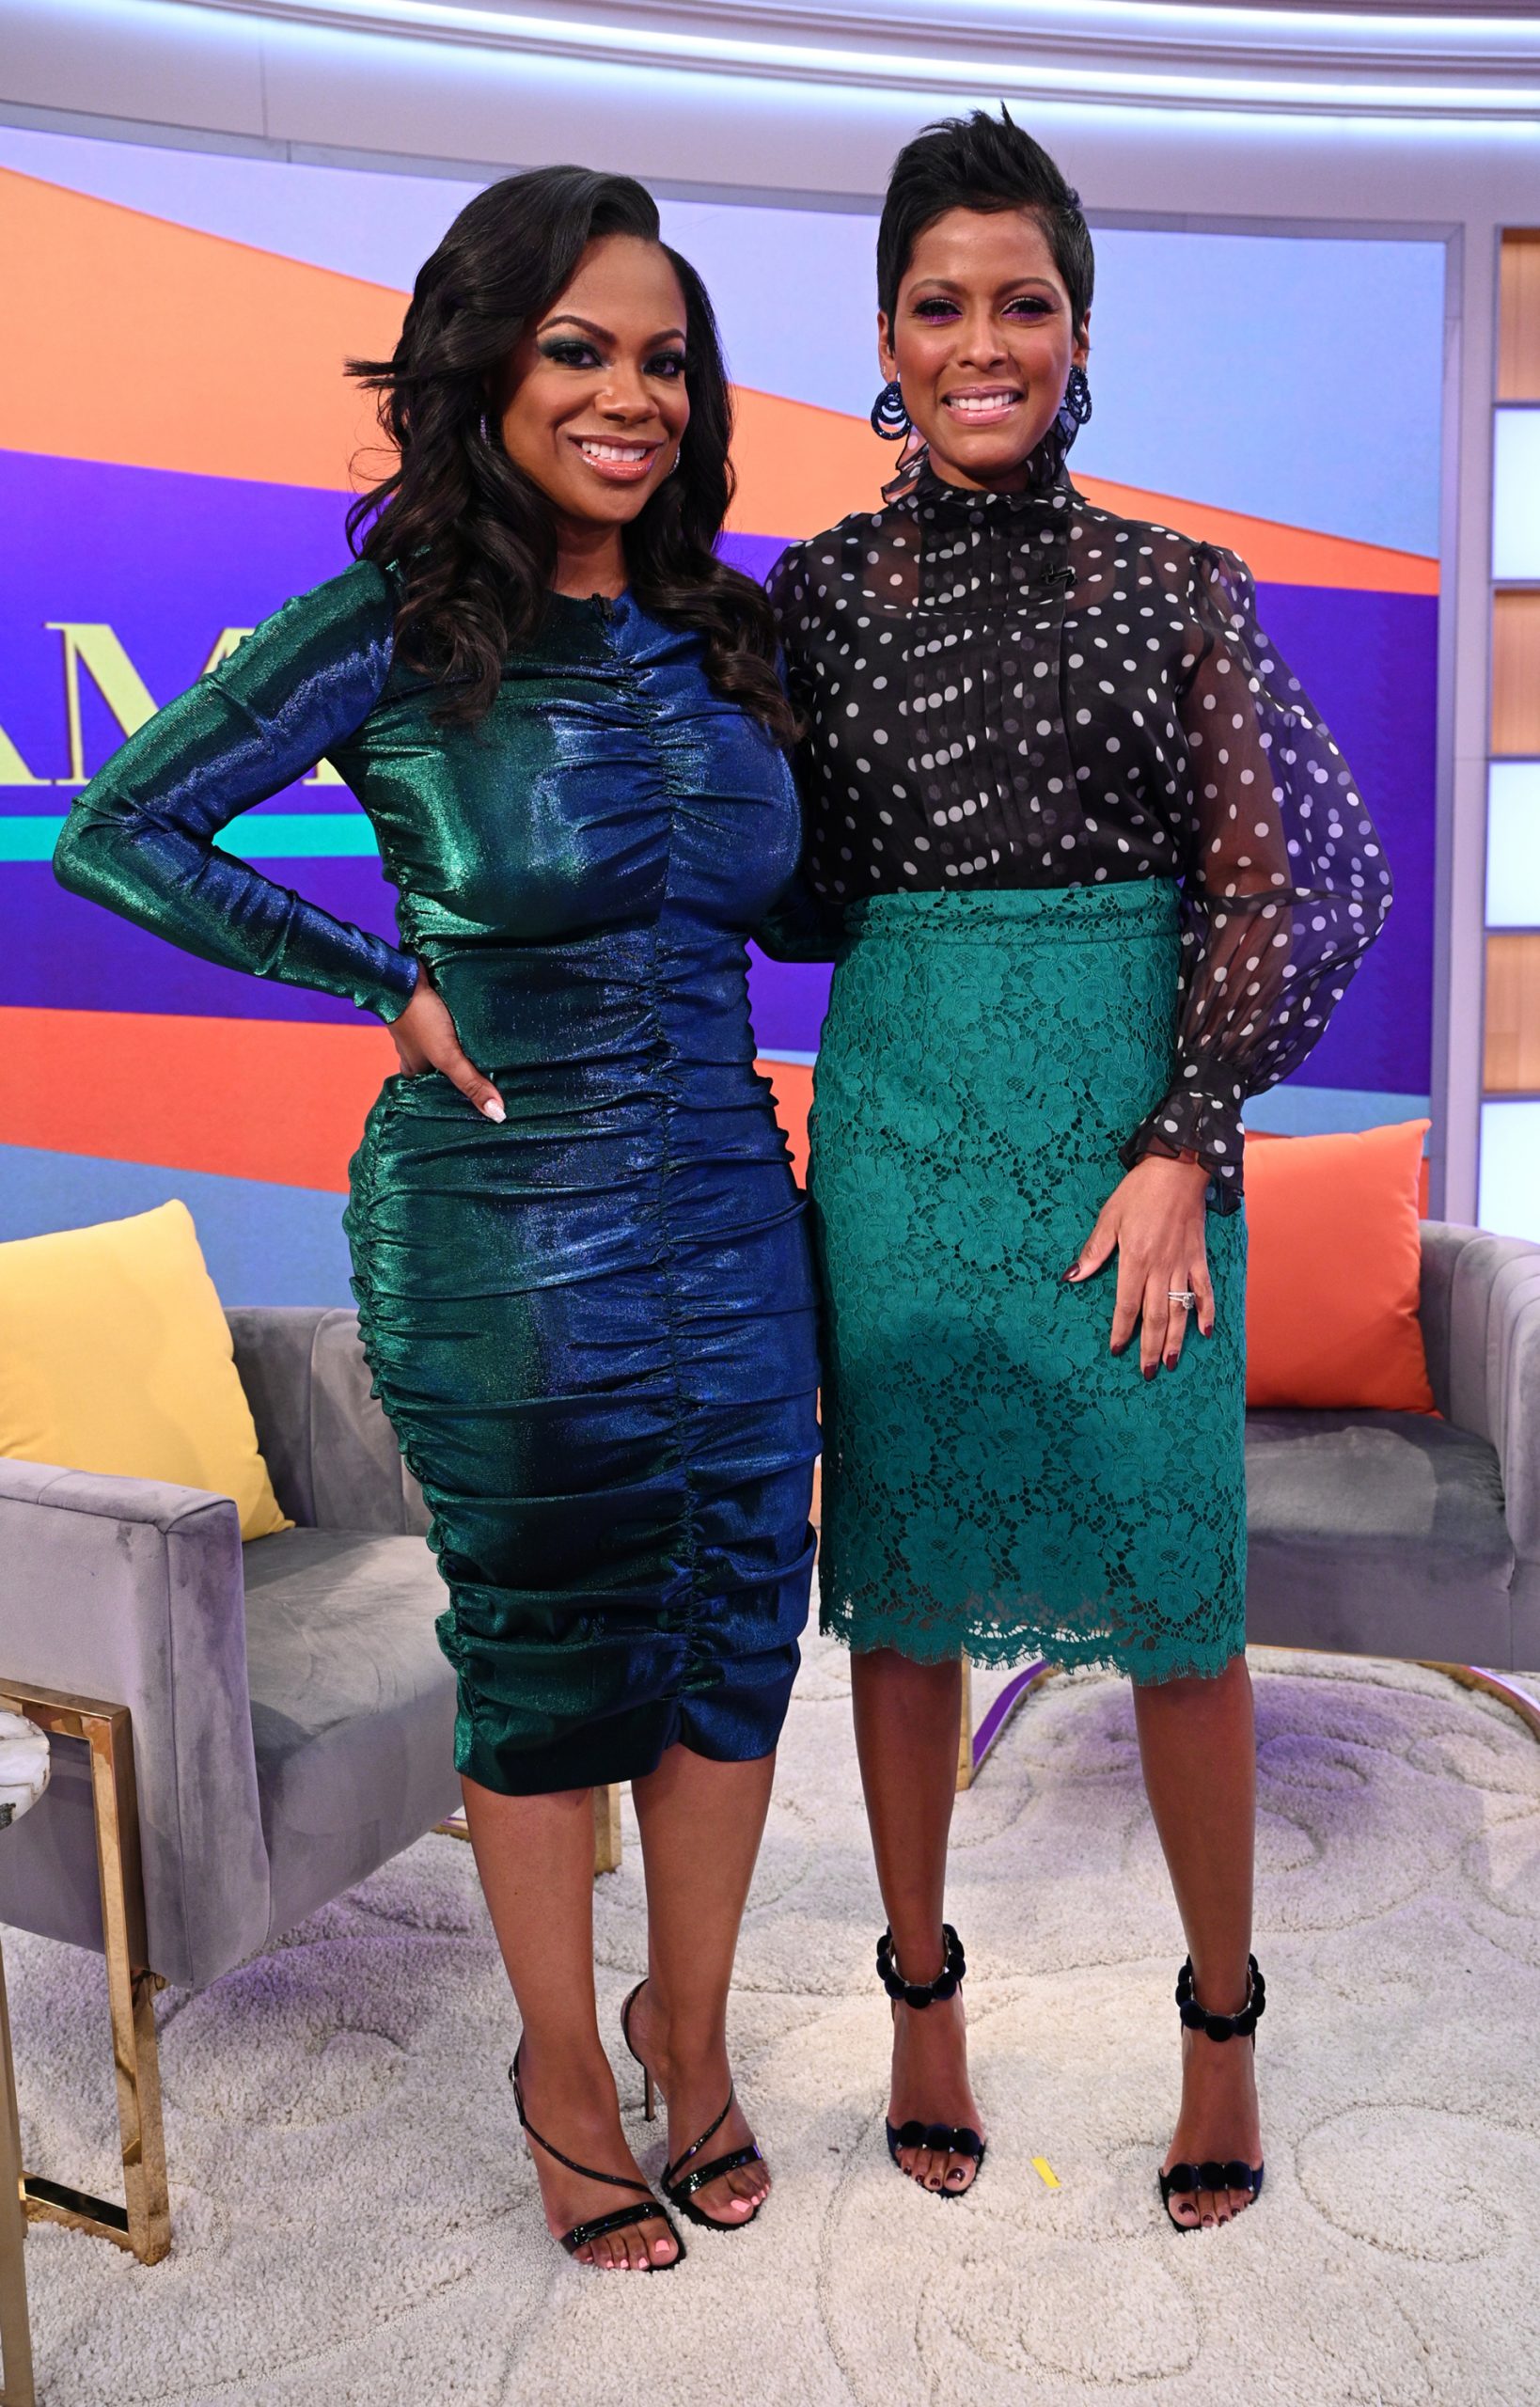 ‘Real Housewives Of Atlanta’ Star Kandi Burruss Opens Up About Being Judged For Having A Baby Via Surrogate On Tamron Hall